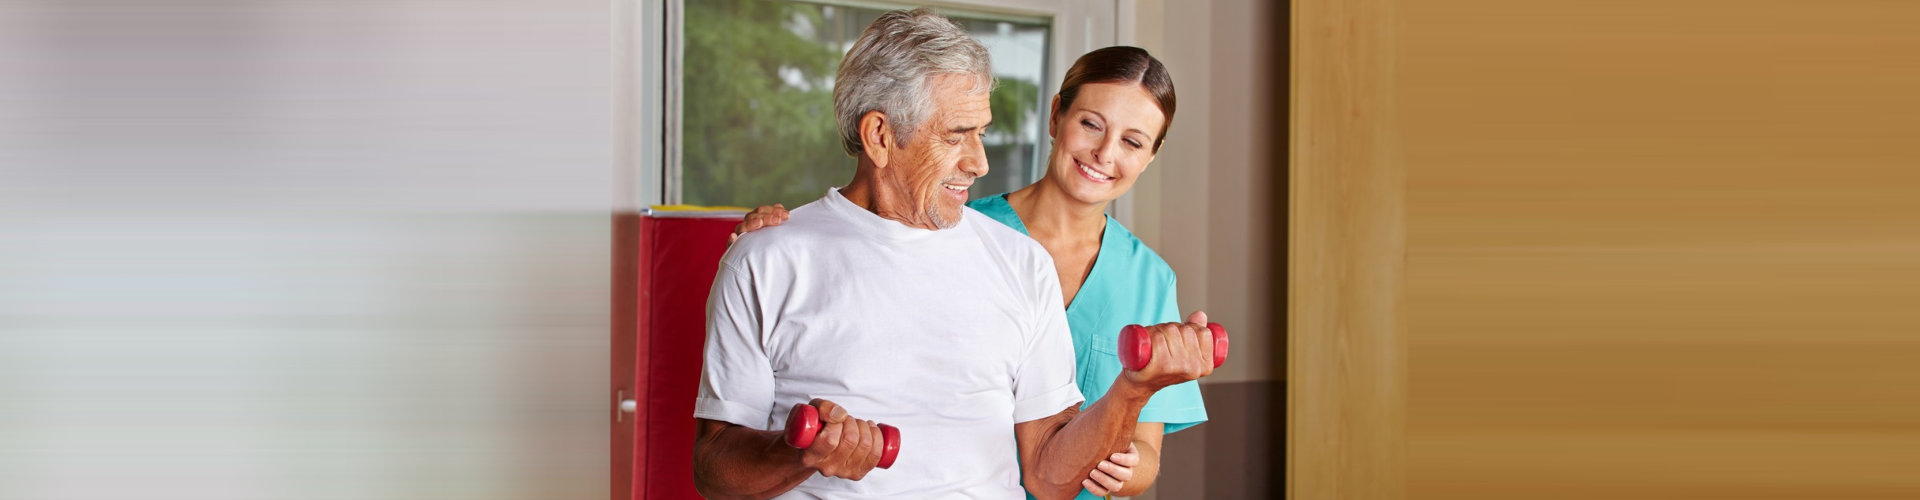 senior man with dumbbells in rehab center with caregiver